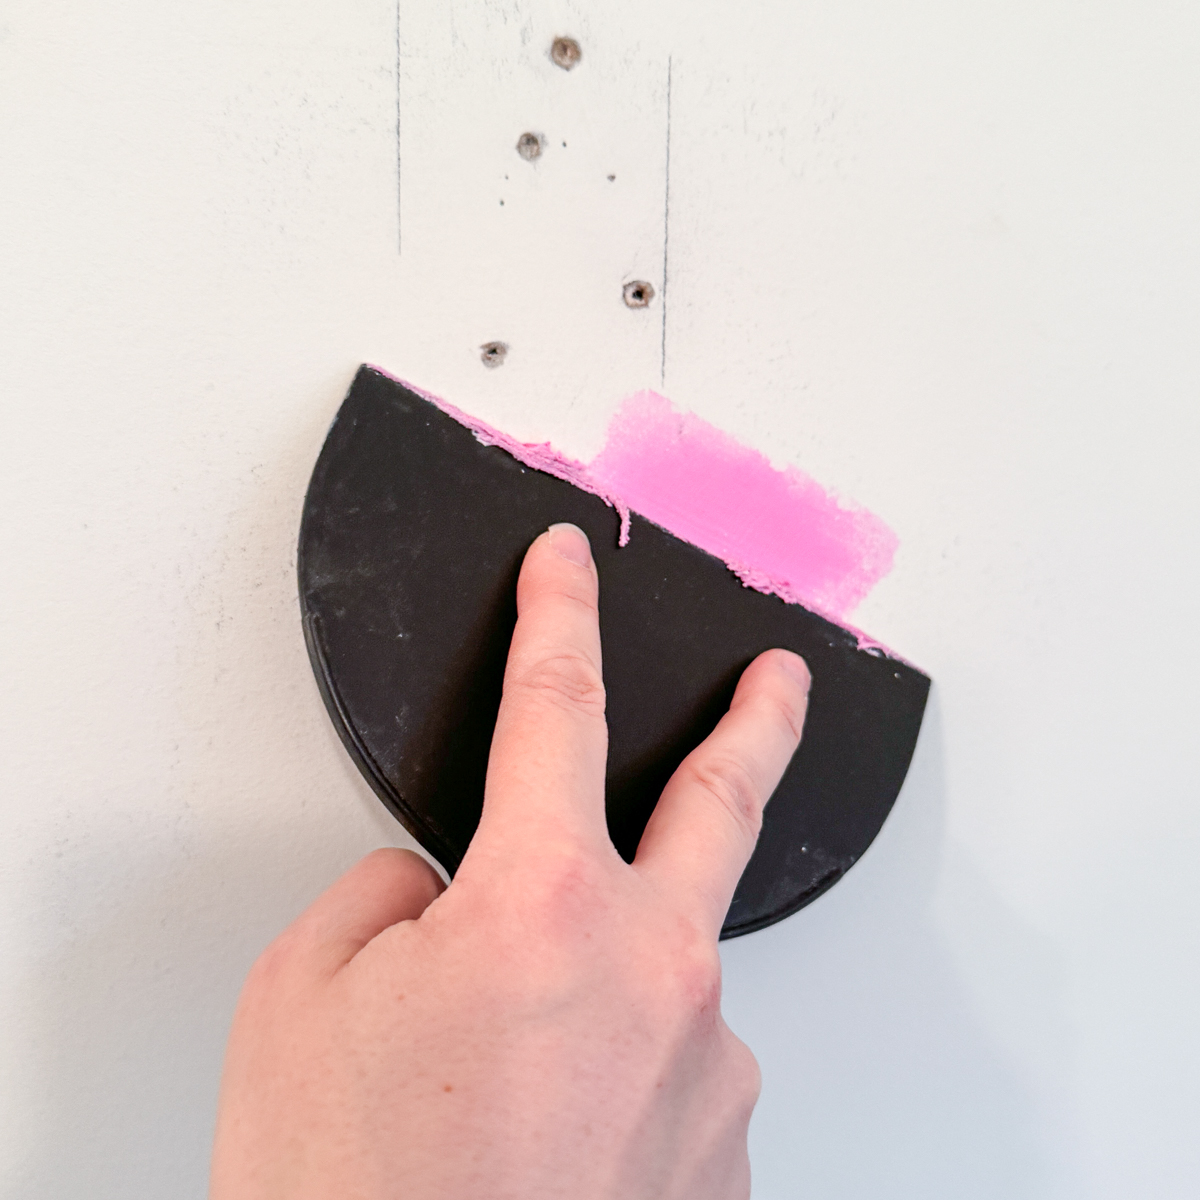 spreading spackle over a hole in drywall